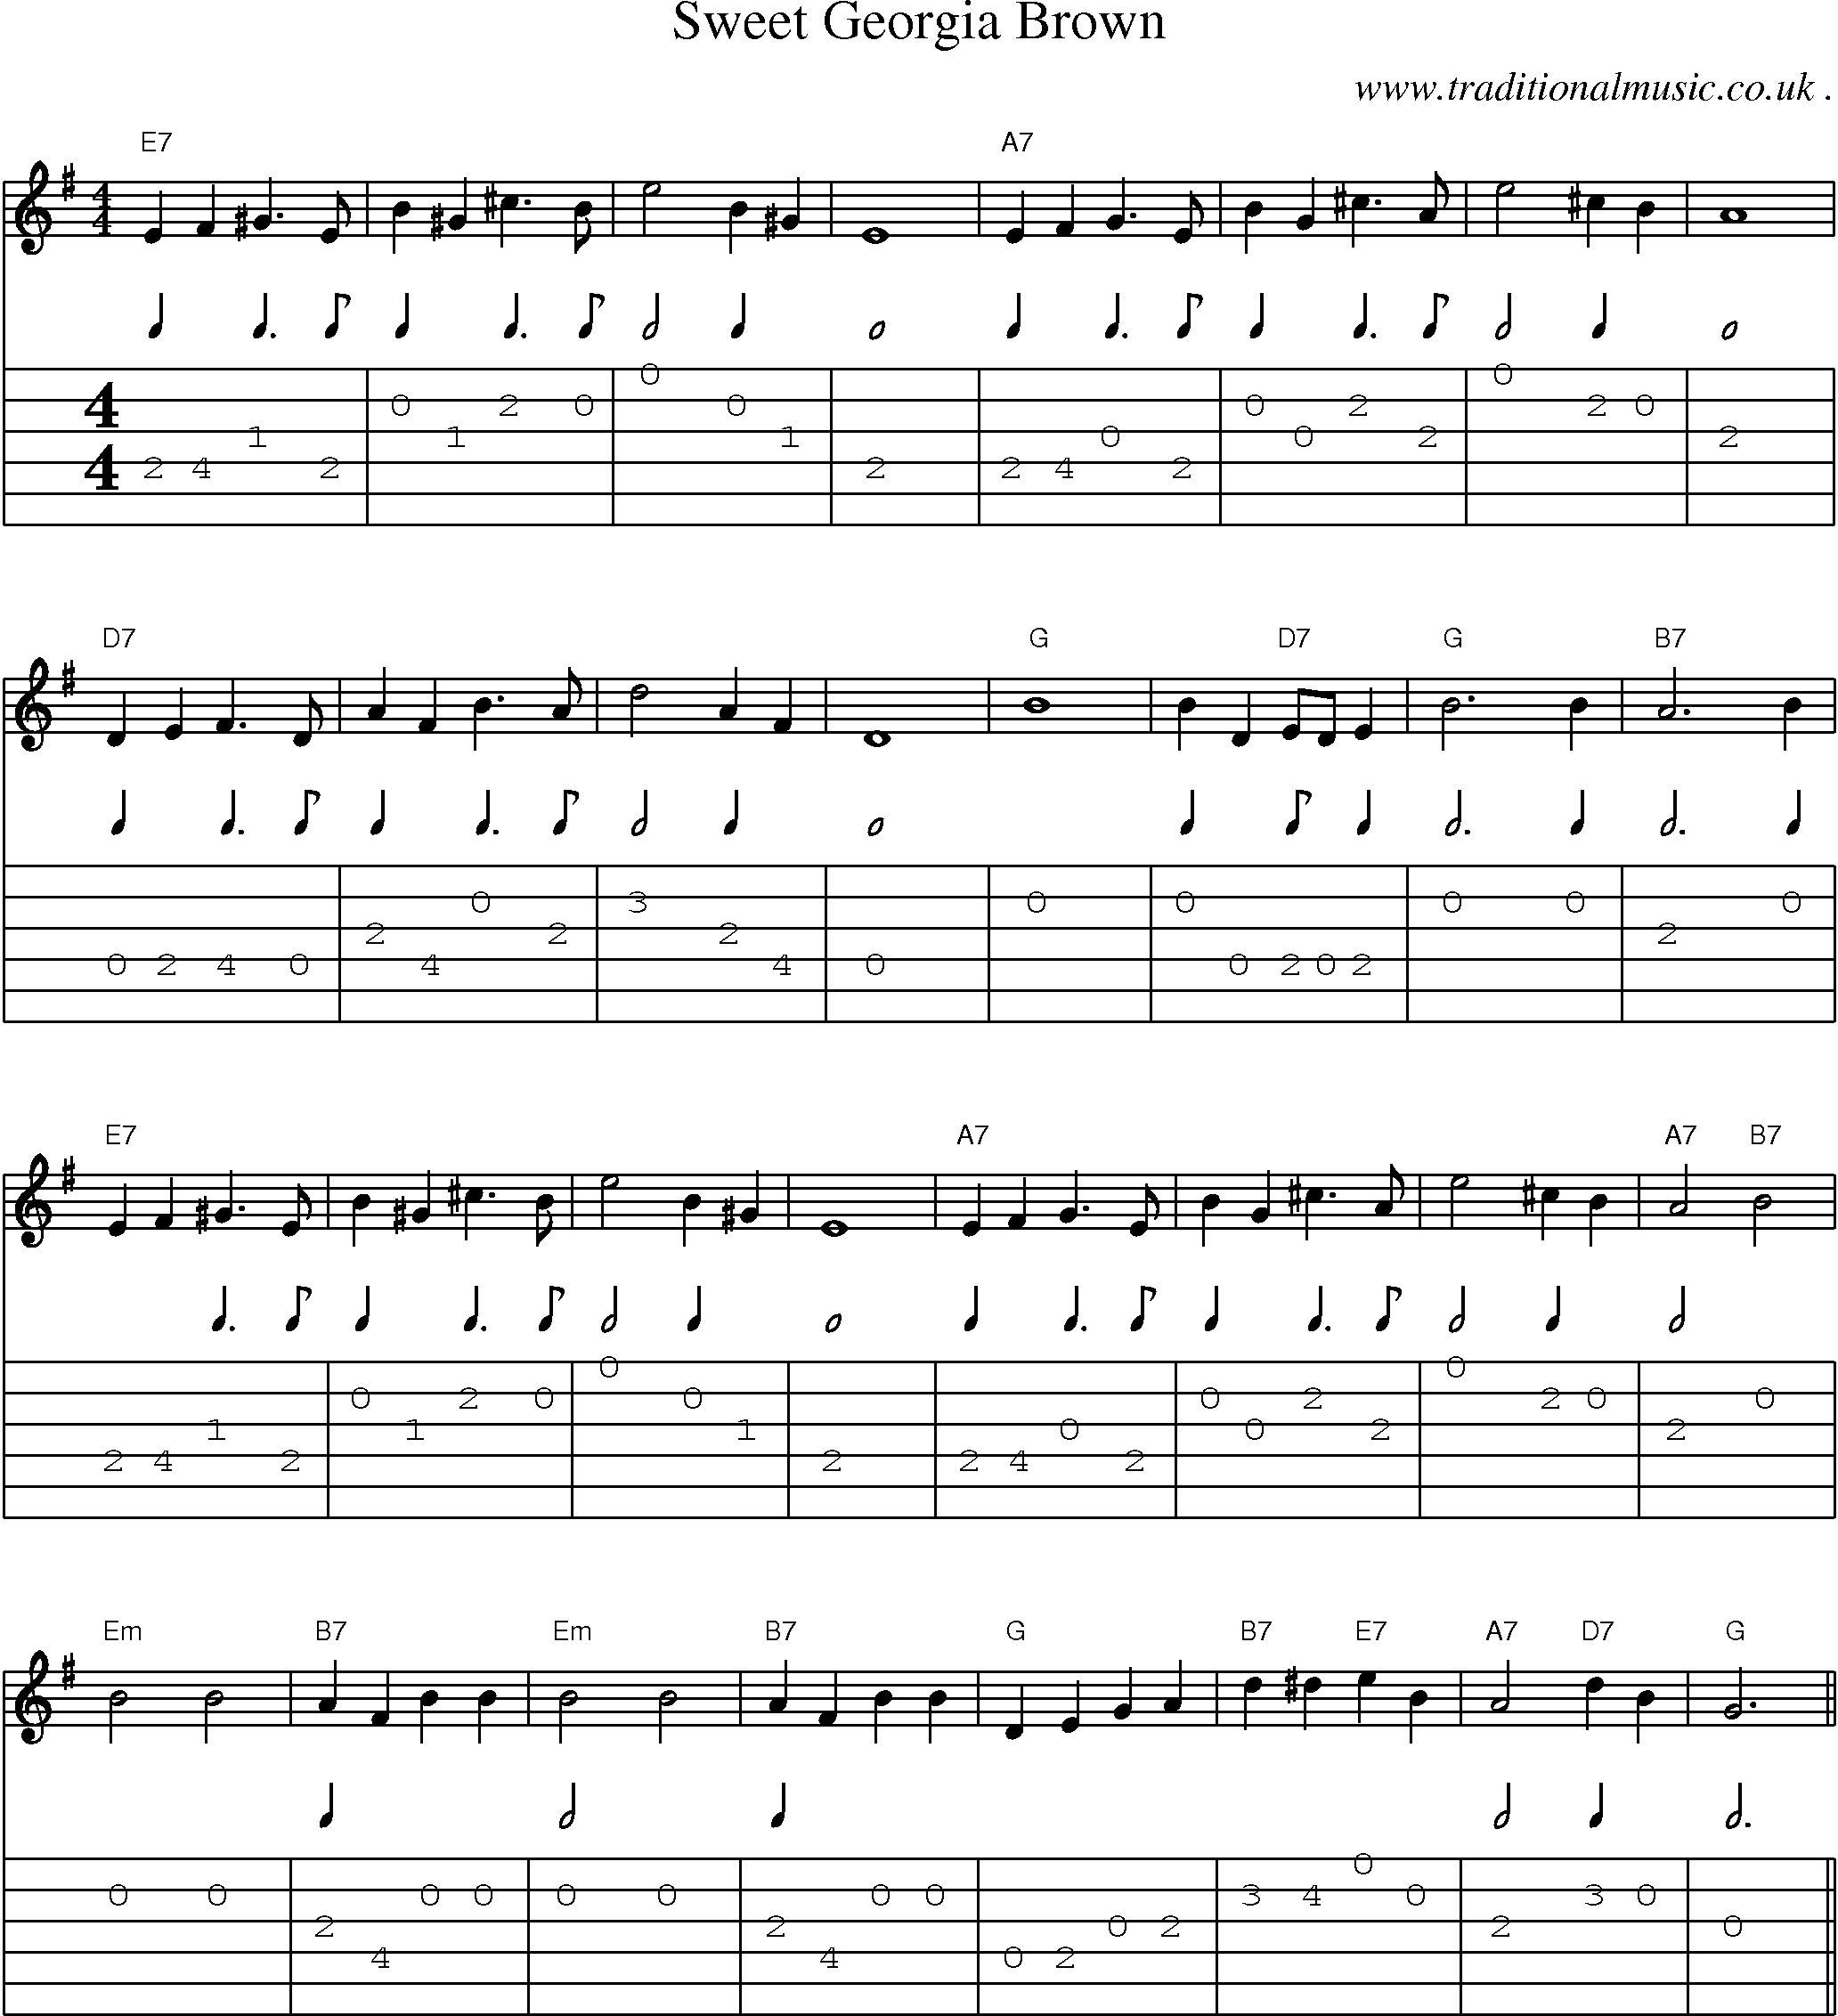 Sheet-Music and Guitar Tabs for Sweet Georgia Brown